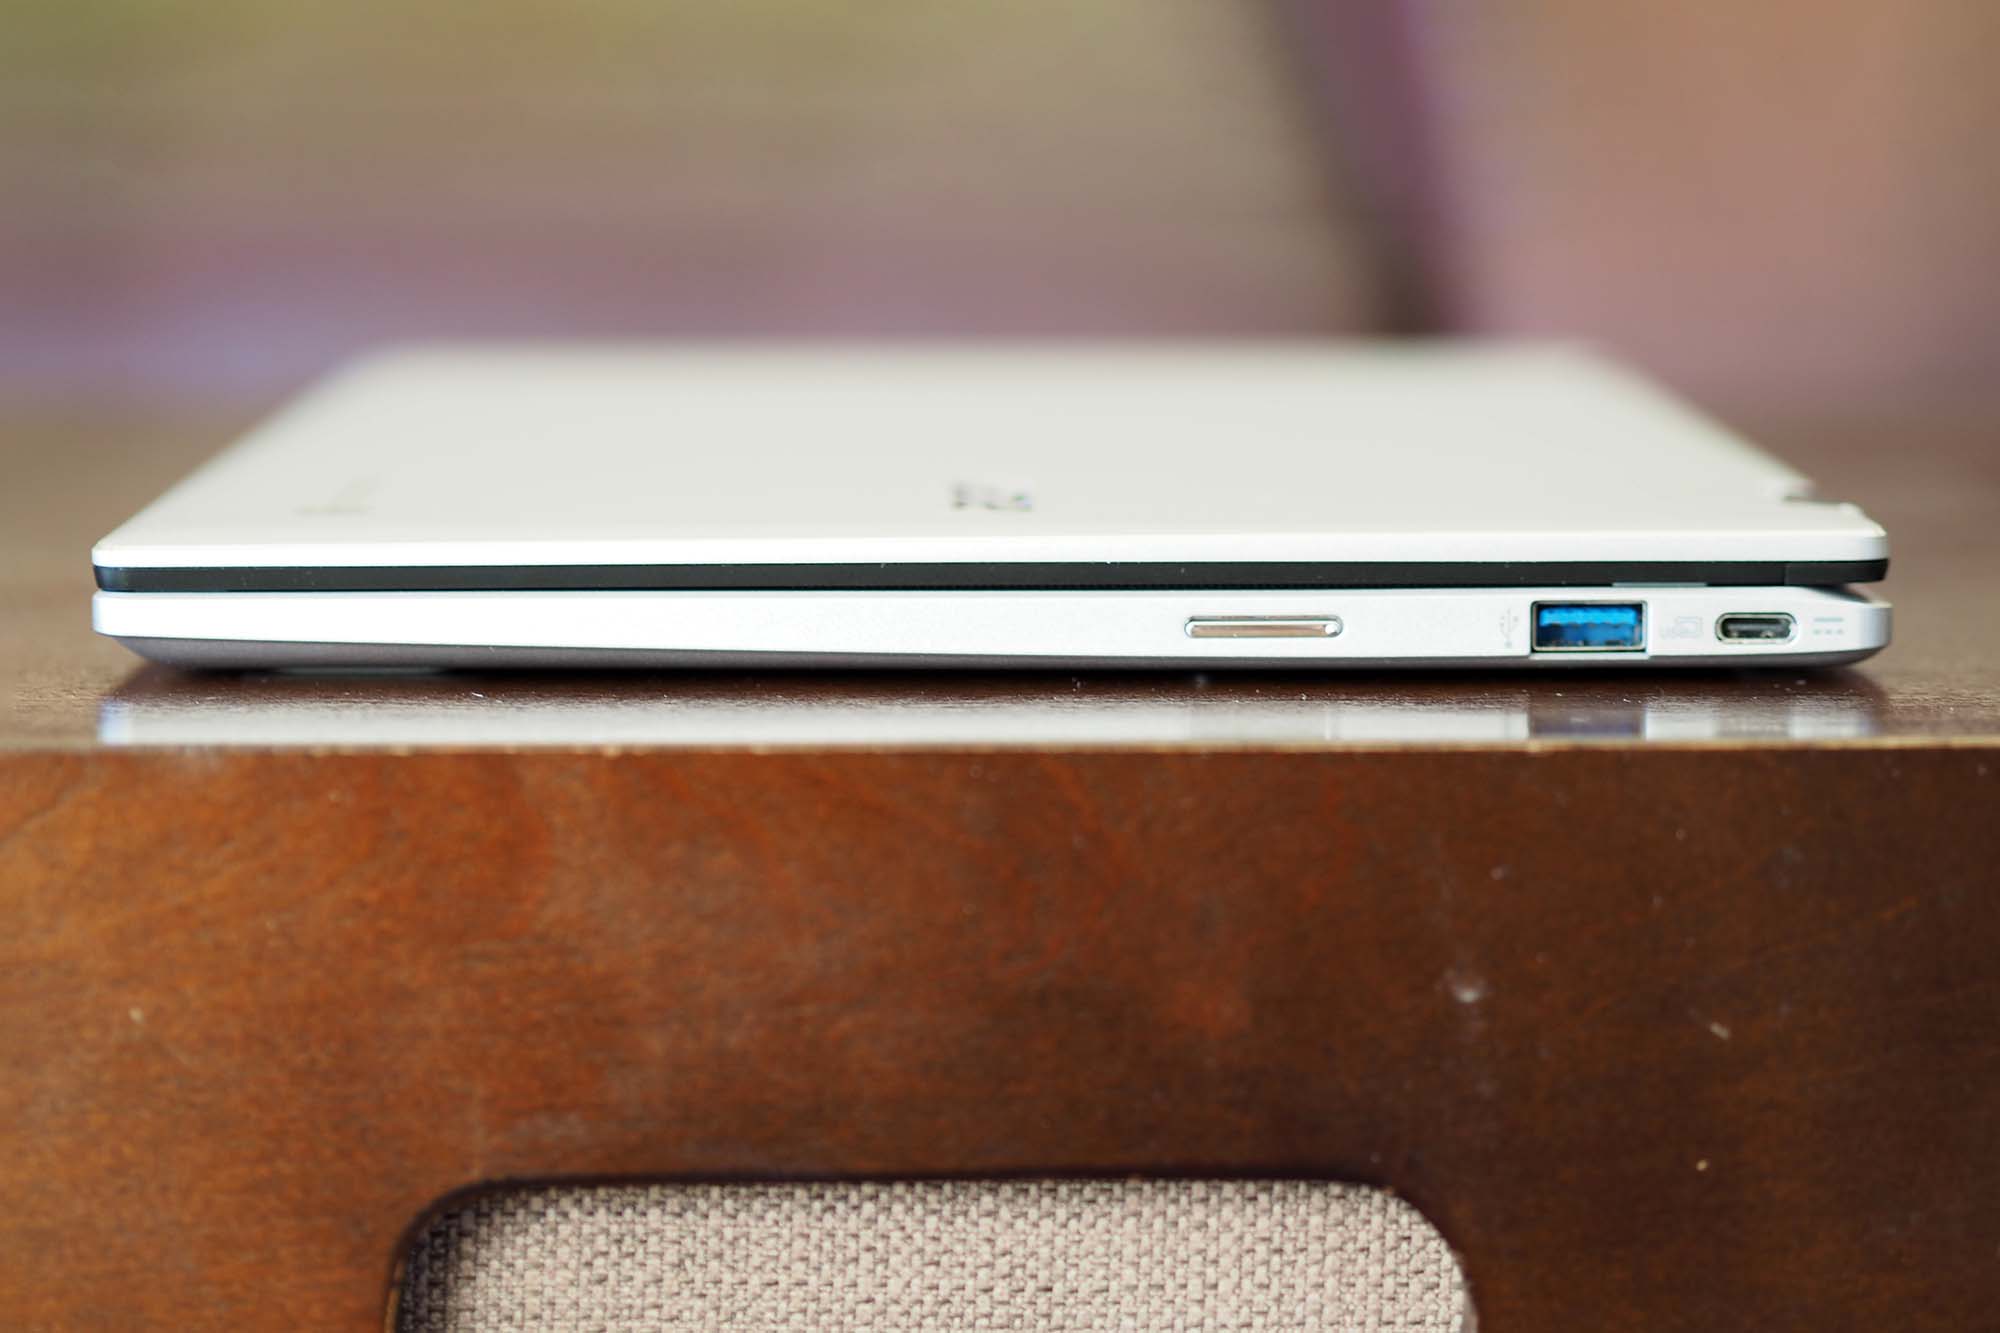 Plug-ins and ports on the right side of the Acer Chromebook Spin 514.